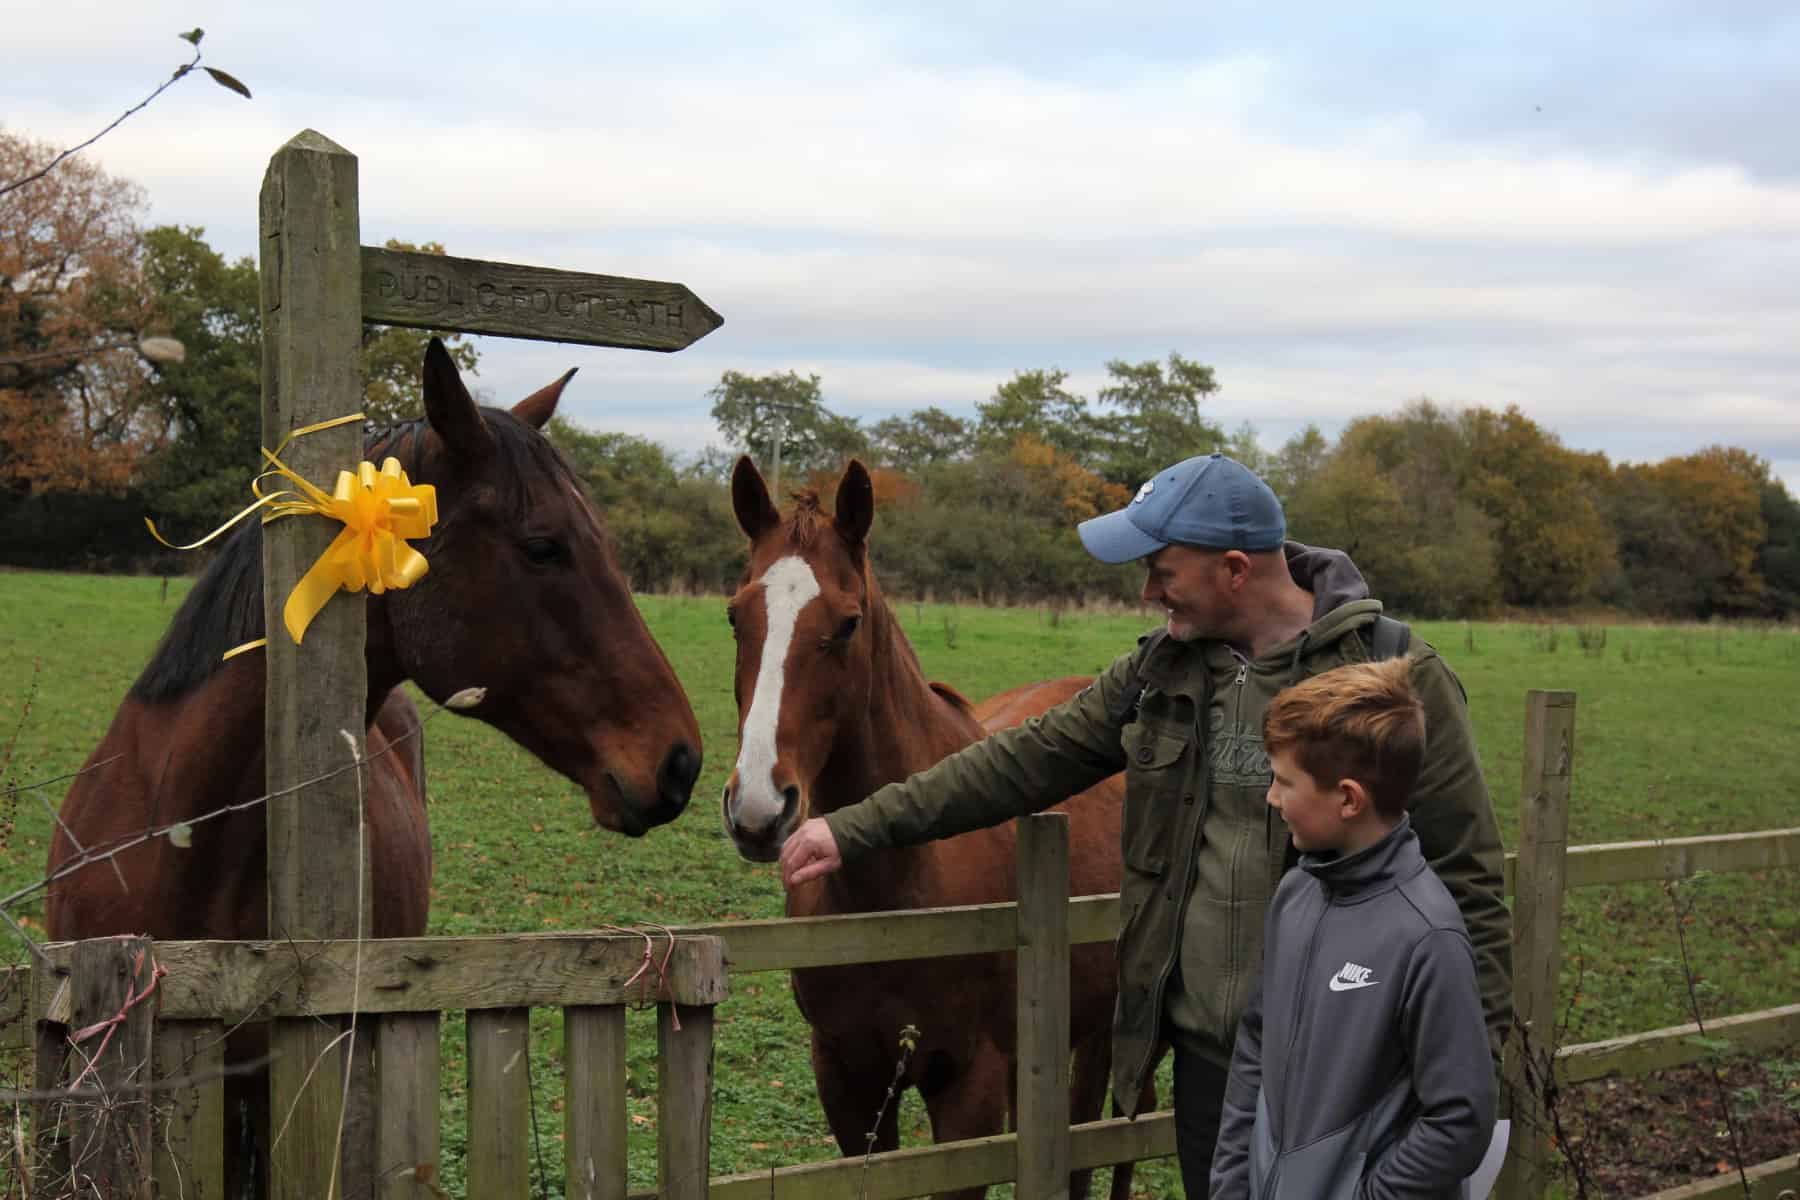 Hucknall-Against-Whyburn-Farm-Development-Supporters-With-Horses-And-Yellow-Ribbon-Next-To-Public-Footpath-Sign-13-11-21